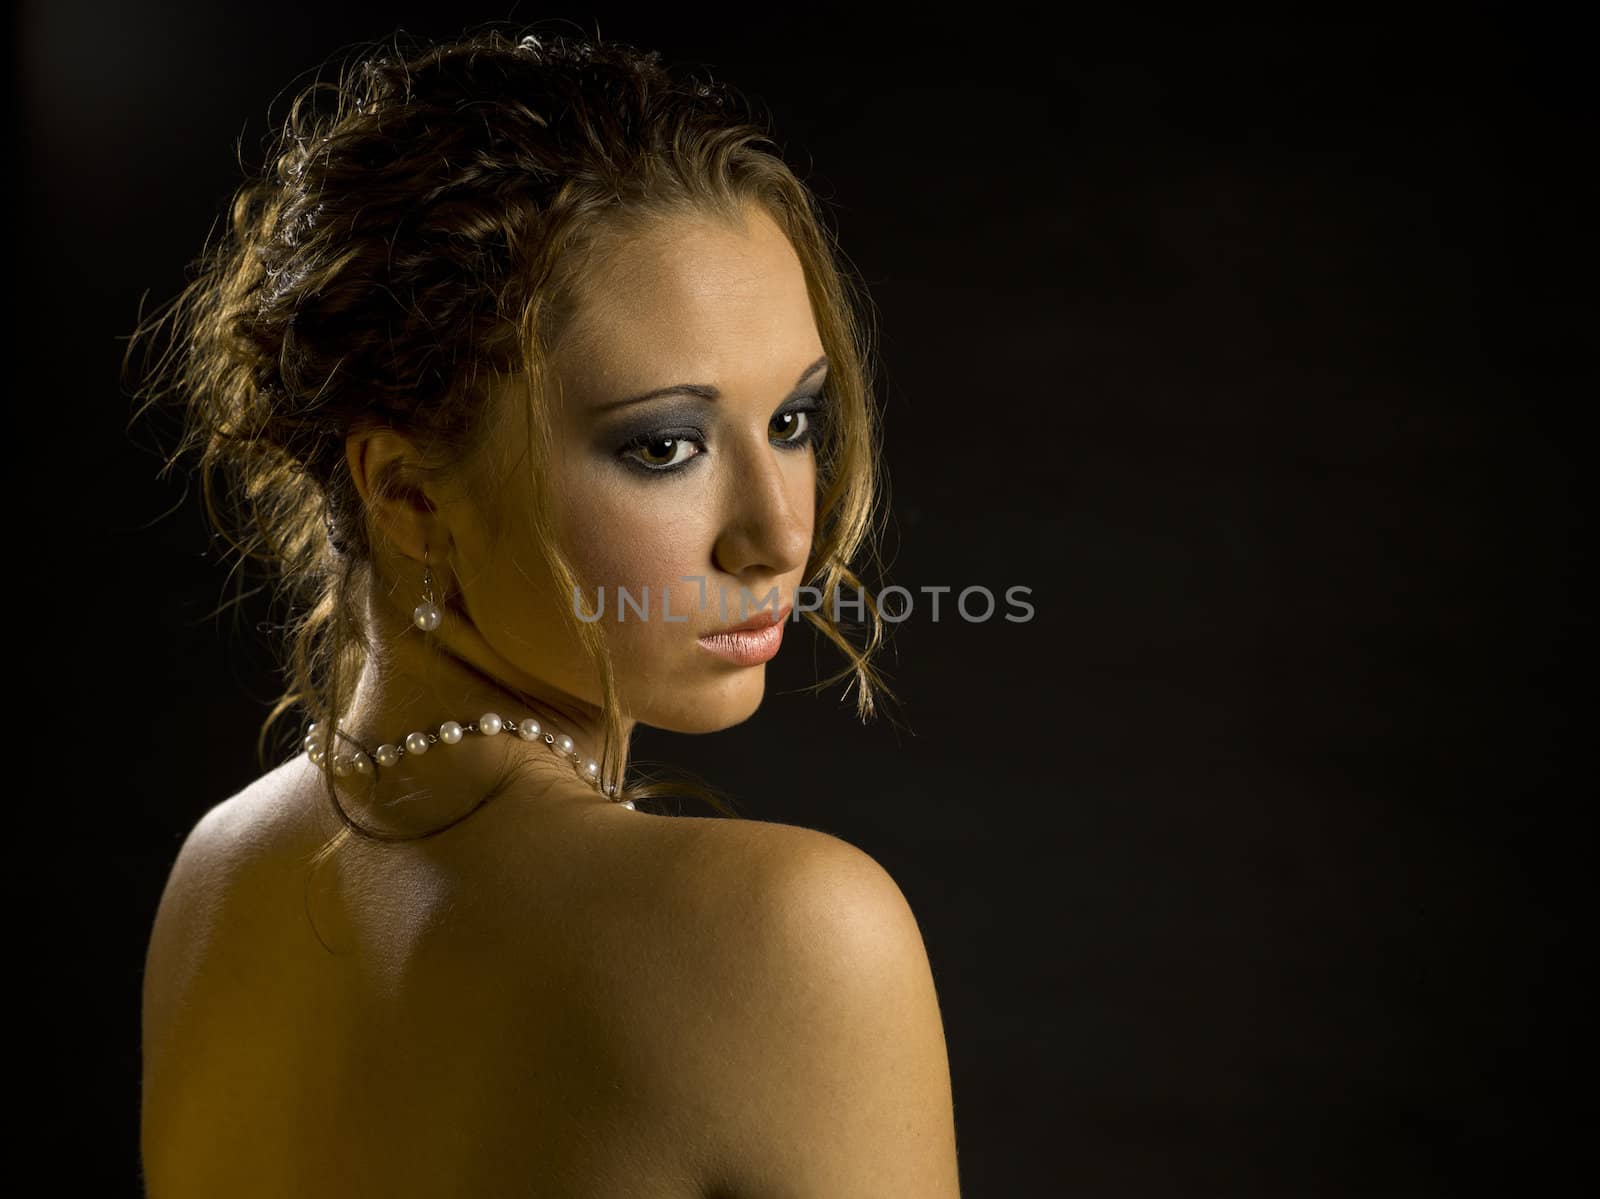 An elegant portrait of a woman on black.                                          Makeup By: Wright Artistry www.wrightartistry.com